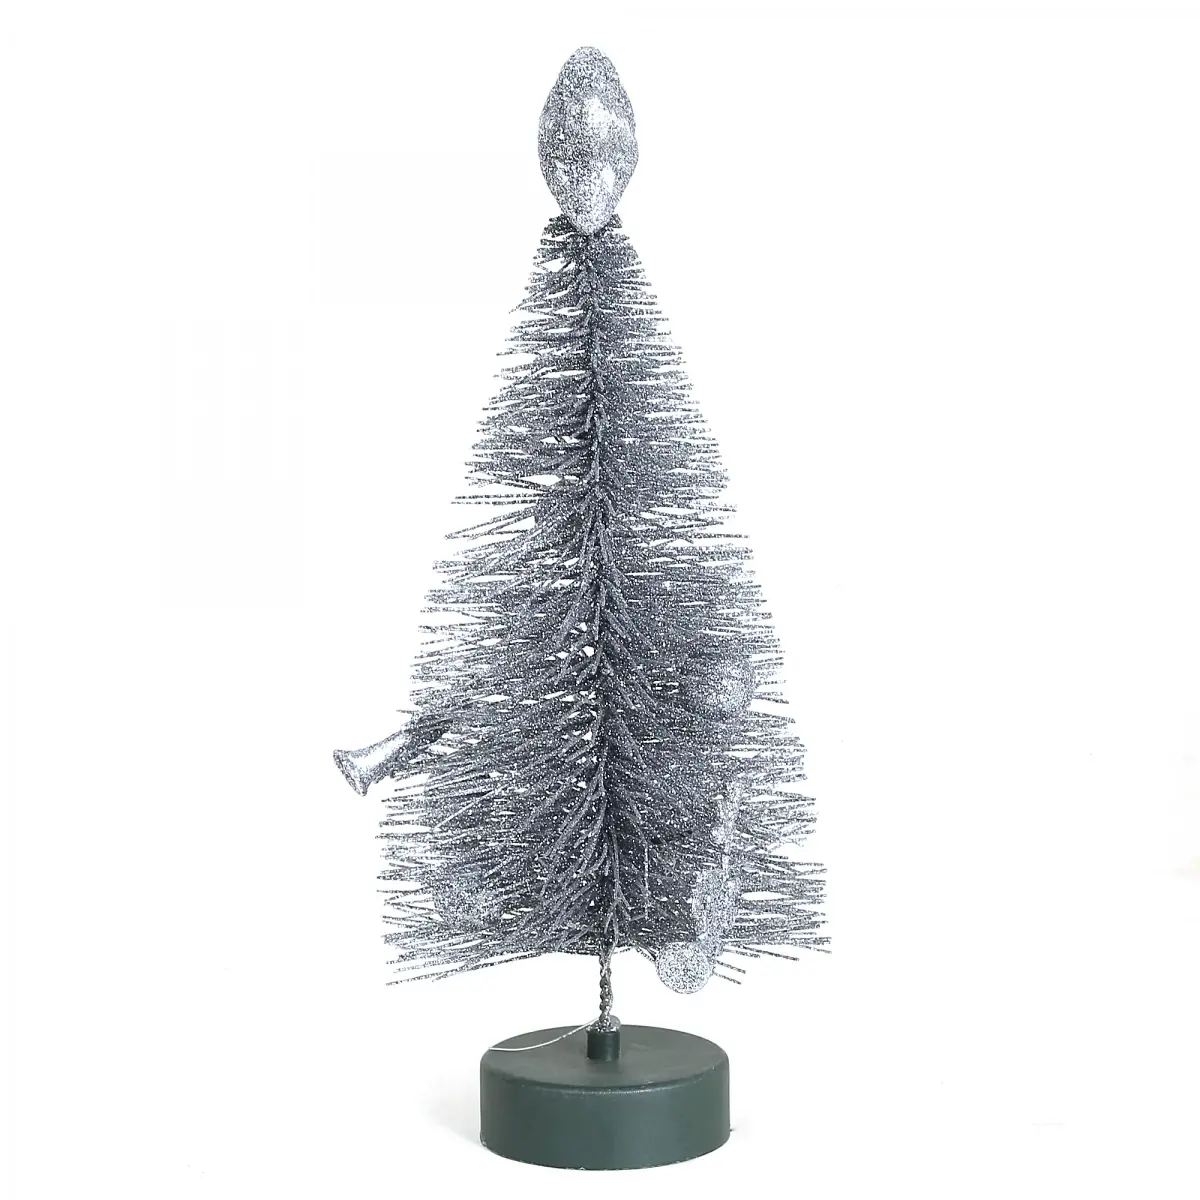 Boing Christmas Tree Decorations, 22cm, Silver